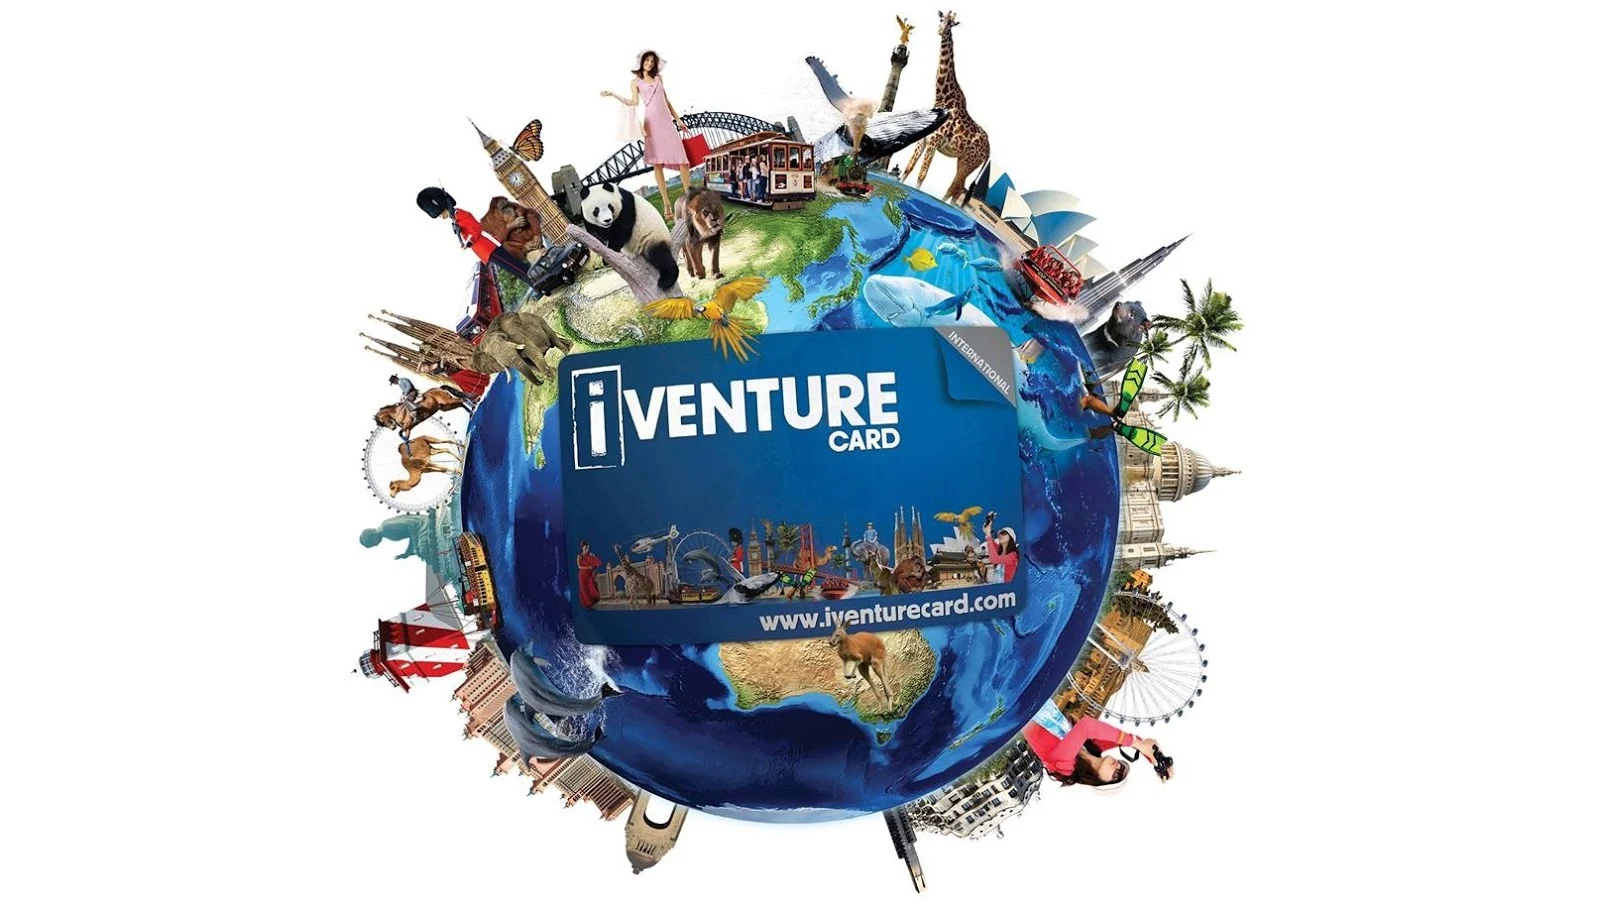 Melbourne-iVenture-Card-Attractions-Pass-Discount-Offers-Cheap-Saving-Guidelines-Independent Travel